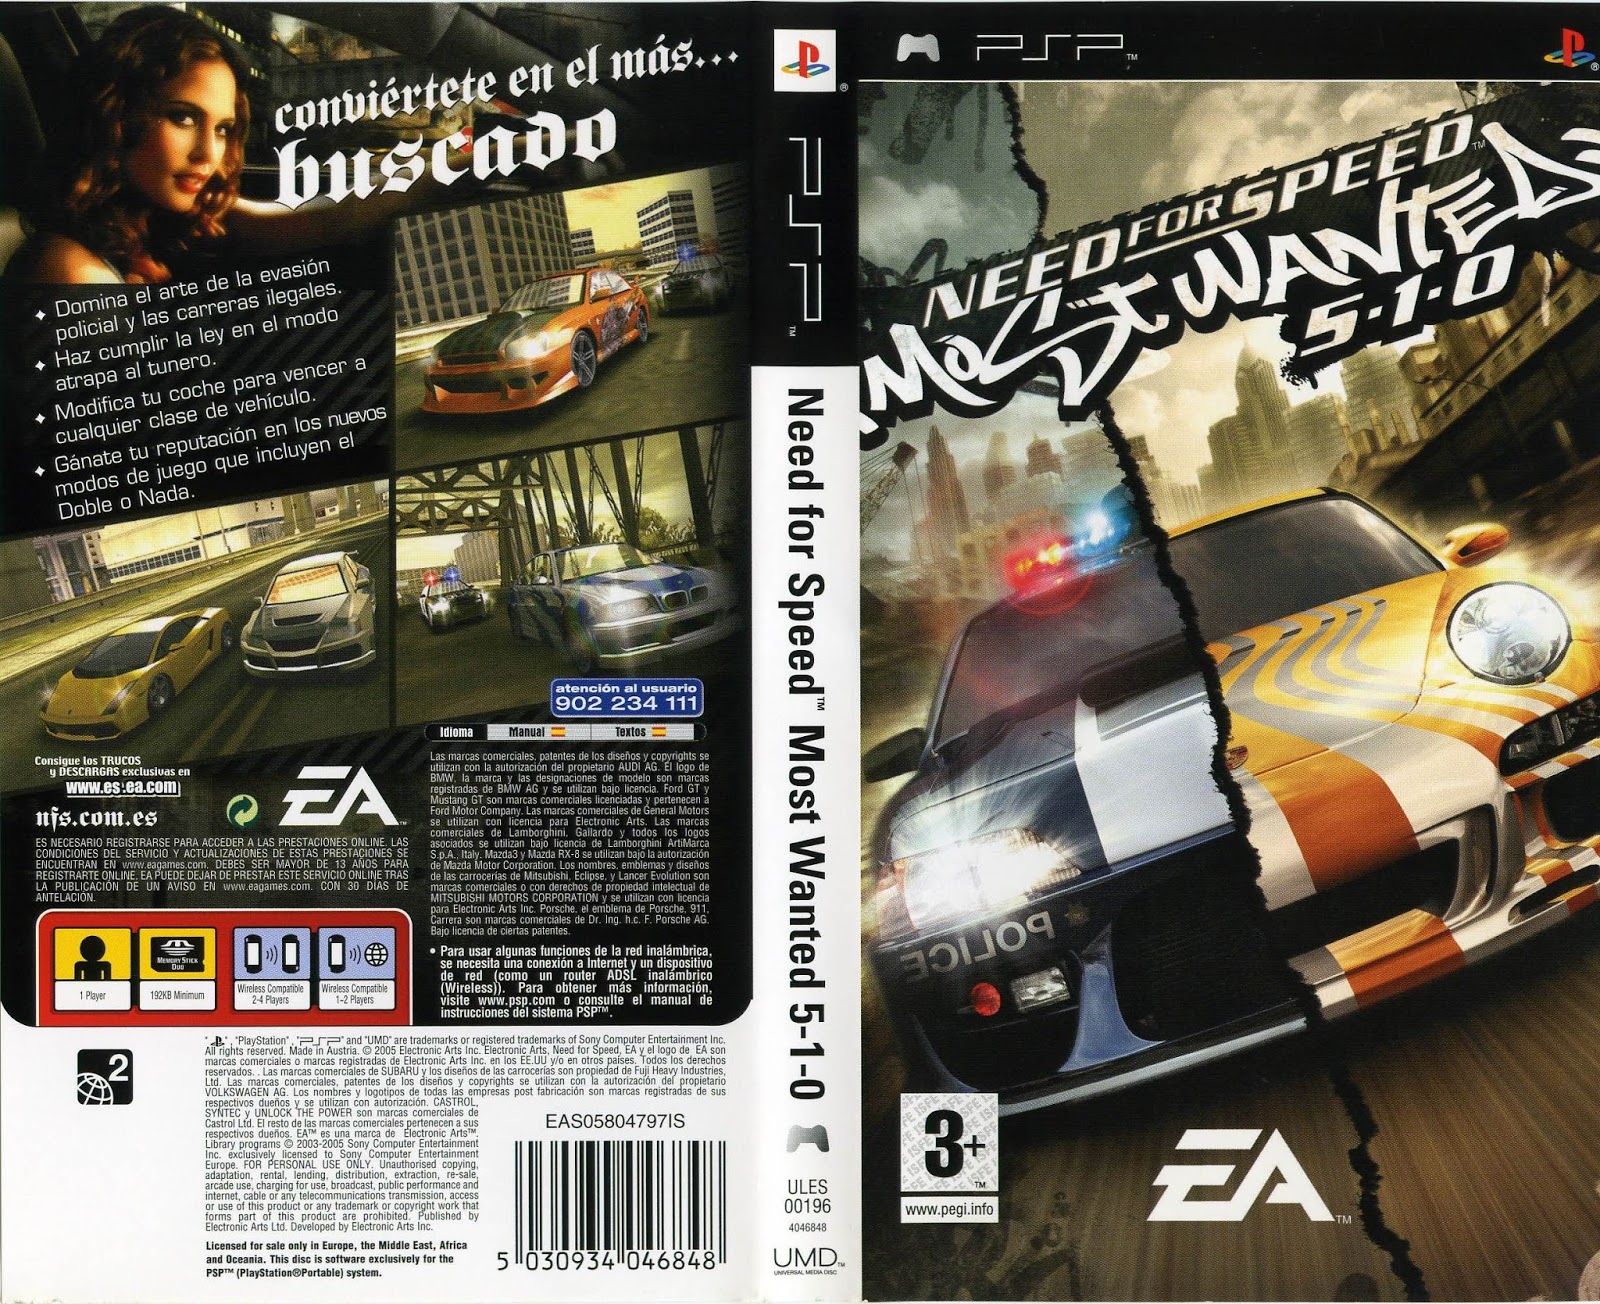 Download Game Need For Speed Most Wanted 5 1 0 Psp Full Version Iso For